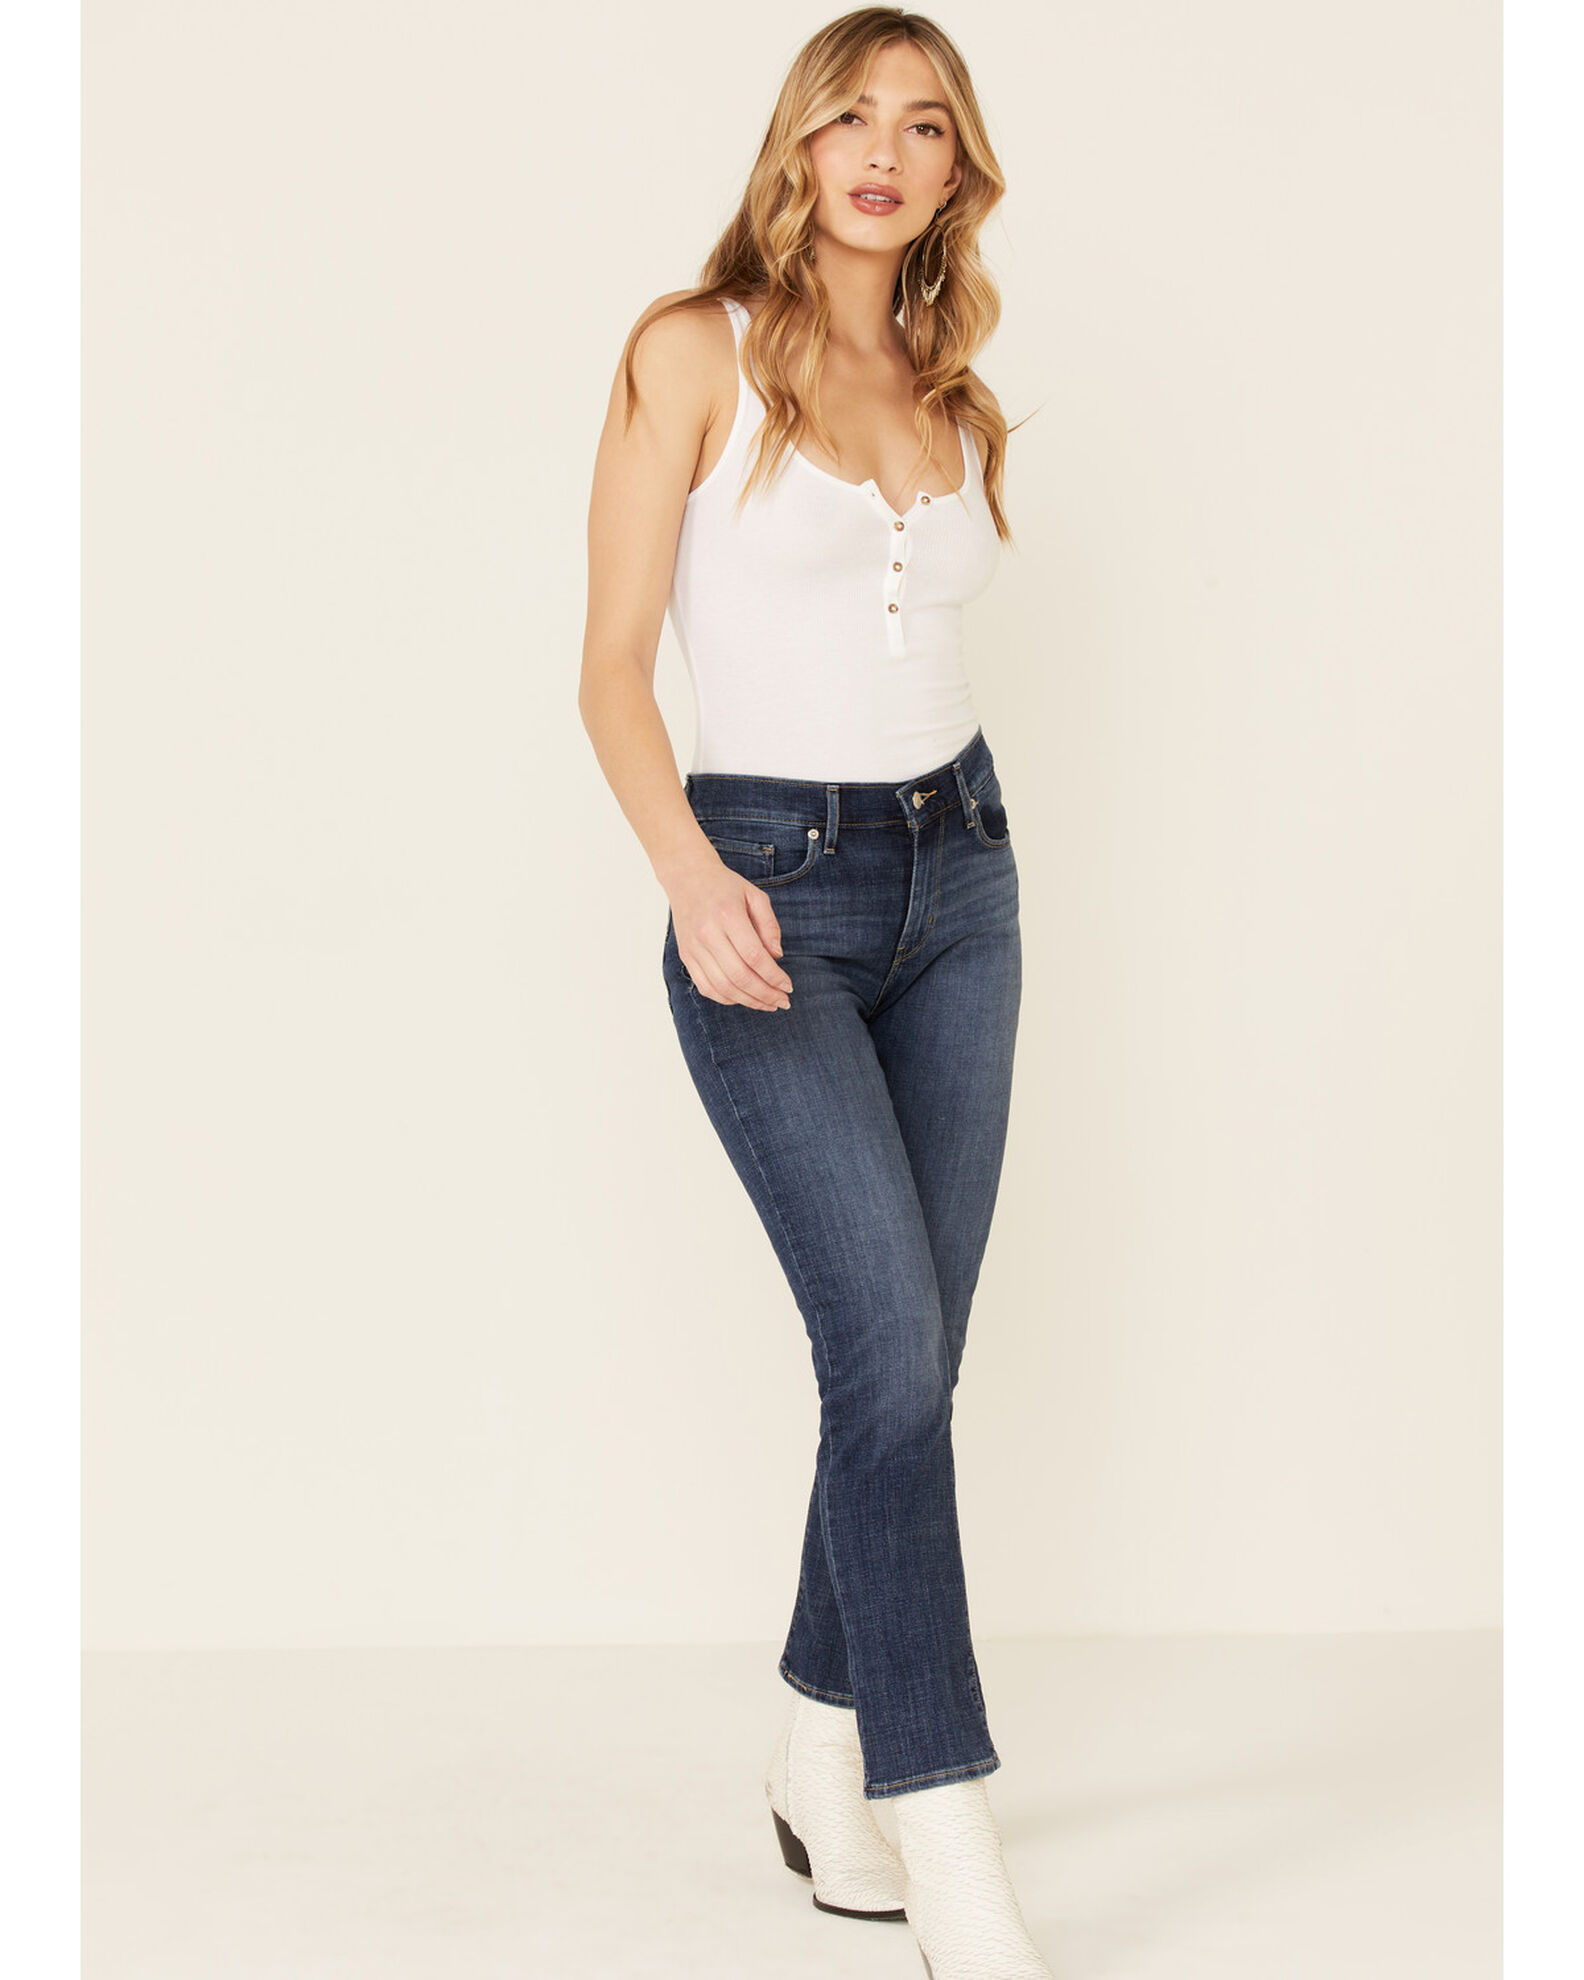 Levi's Women's Classic Straight Mid Rise Maui Waterfall Jeans | Sheplers